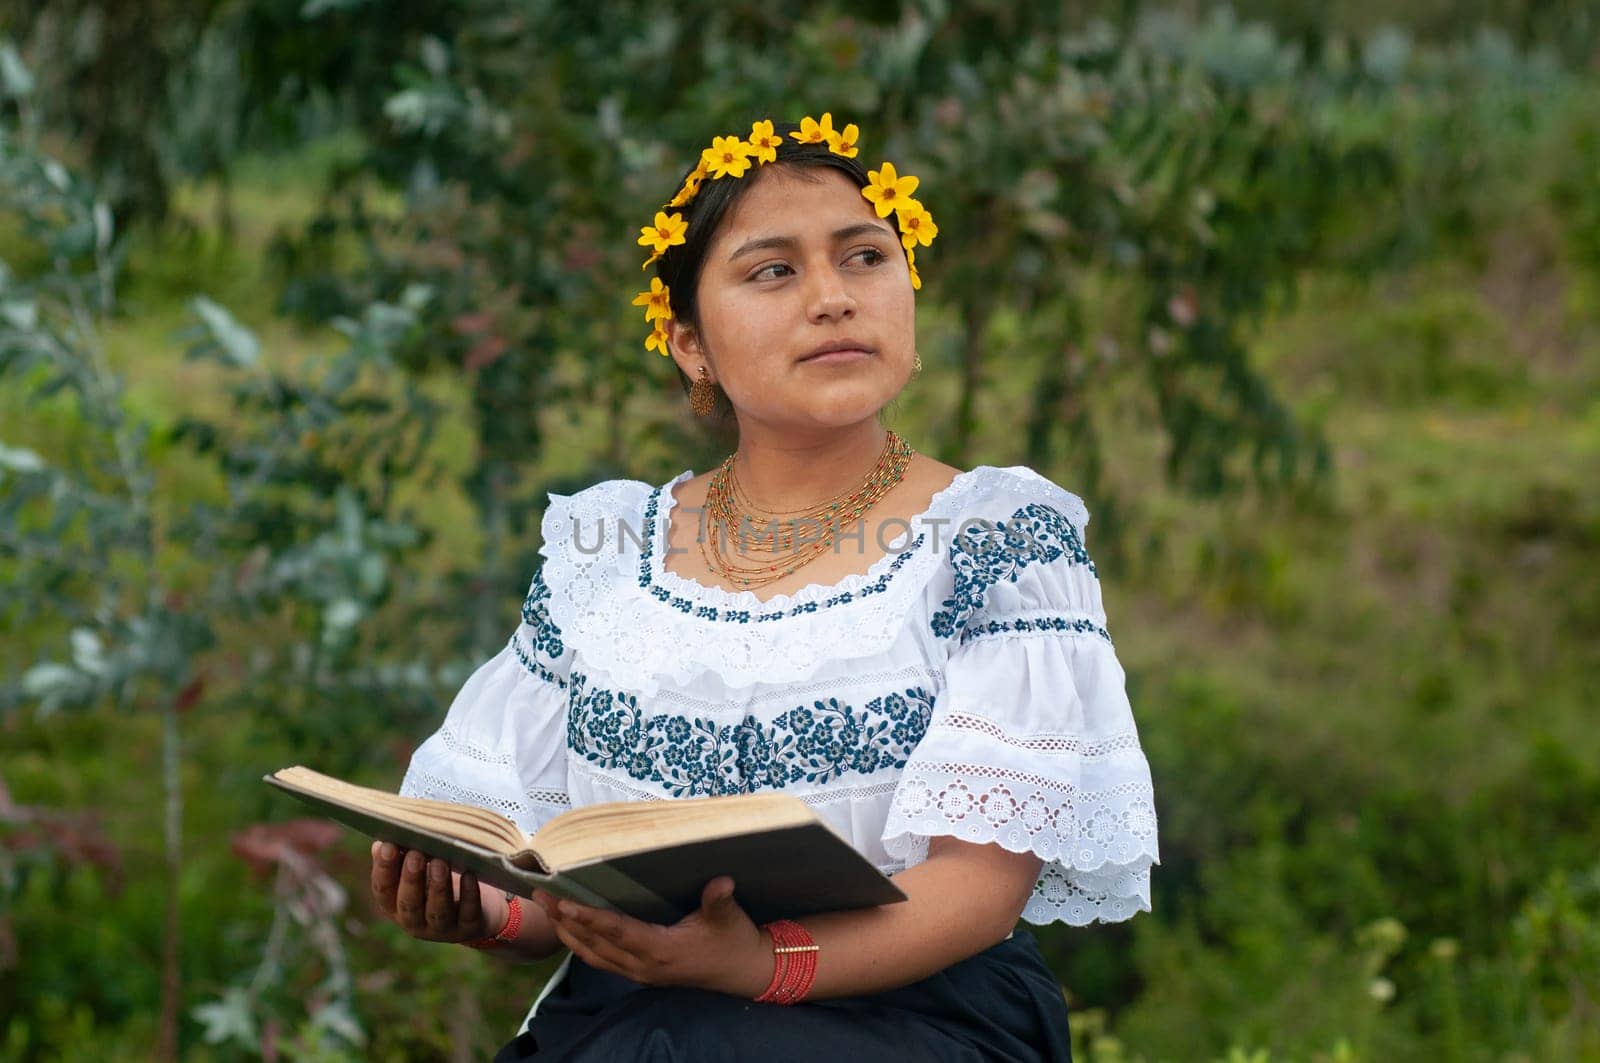 A captivating photograph showing a Mexican woman elegantly attired in traditional Mexican dress, absorbed in the pages of a book.